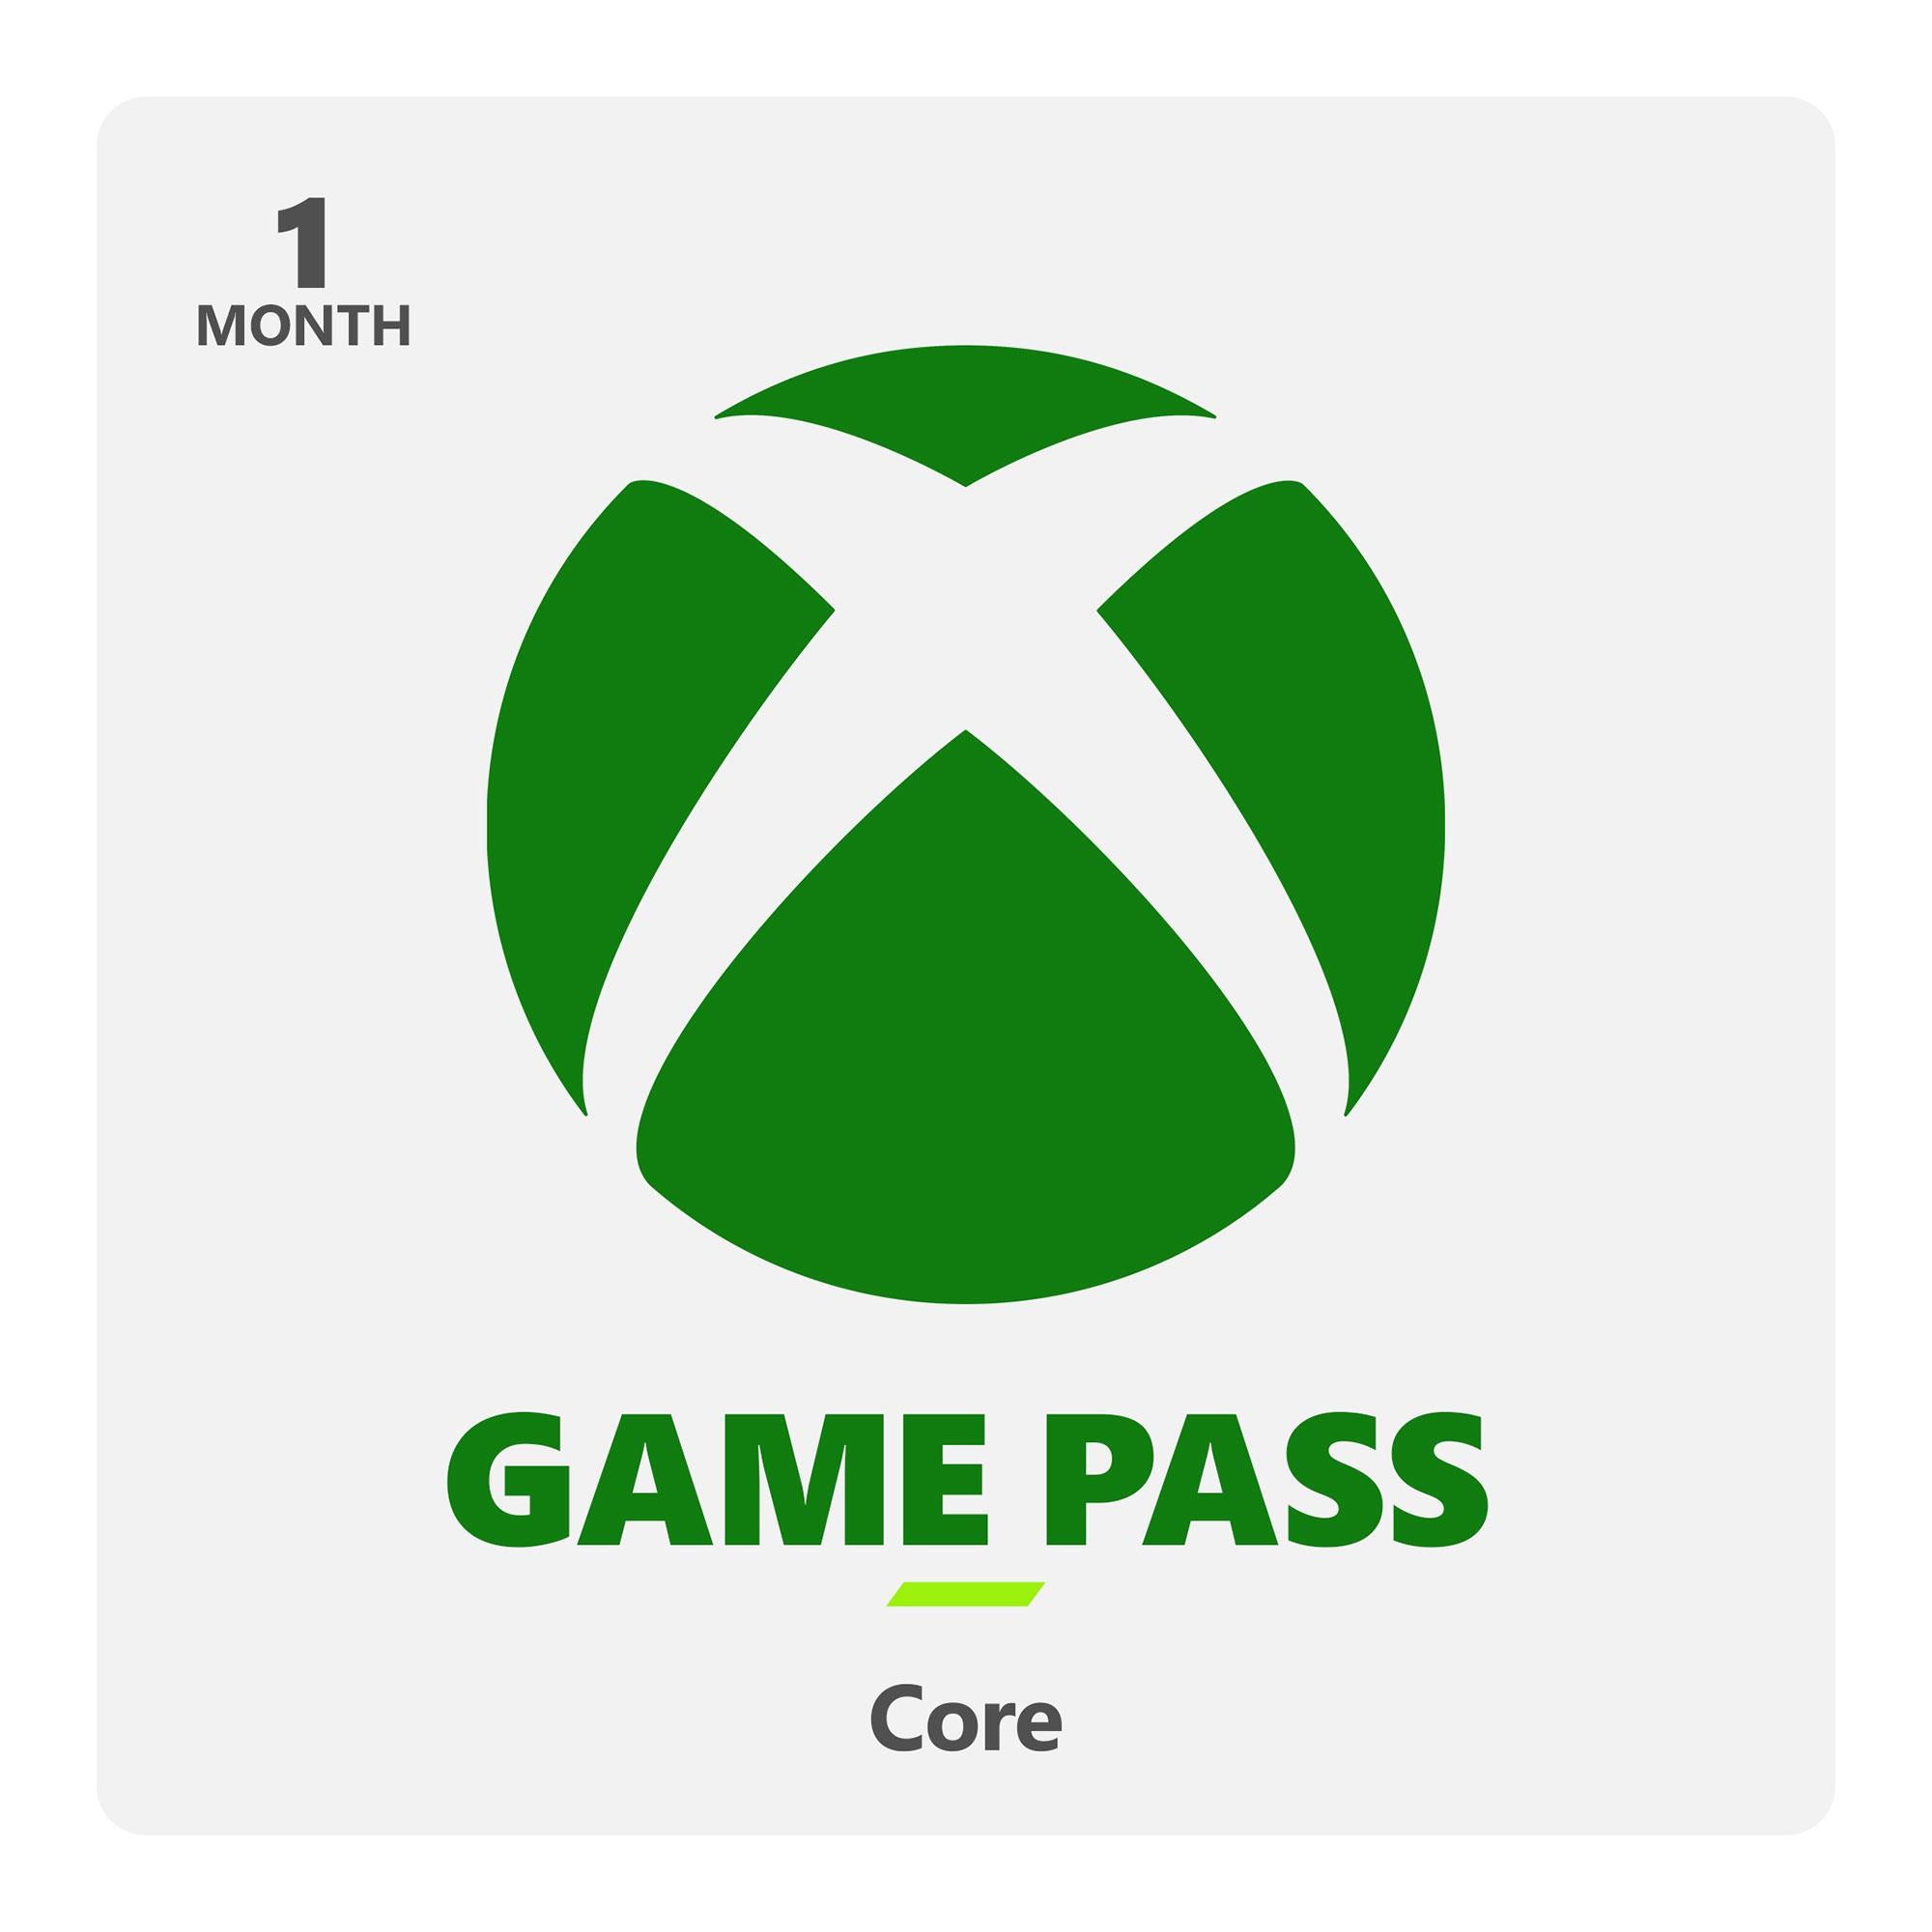 xbox game pass core 1 month subscription (digital download)